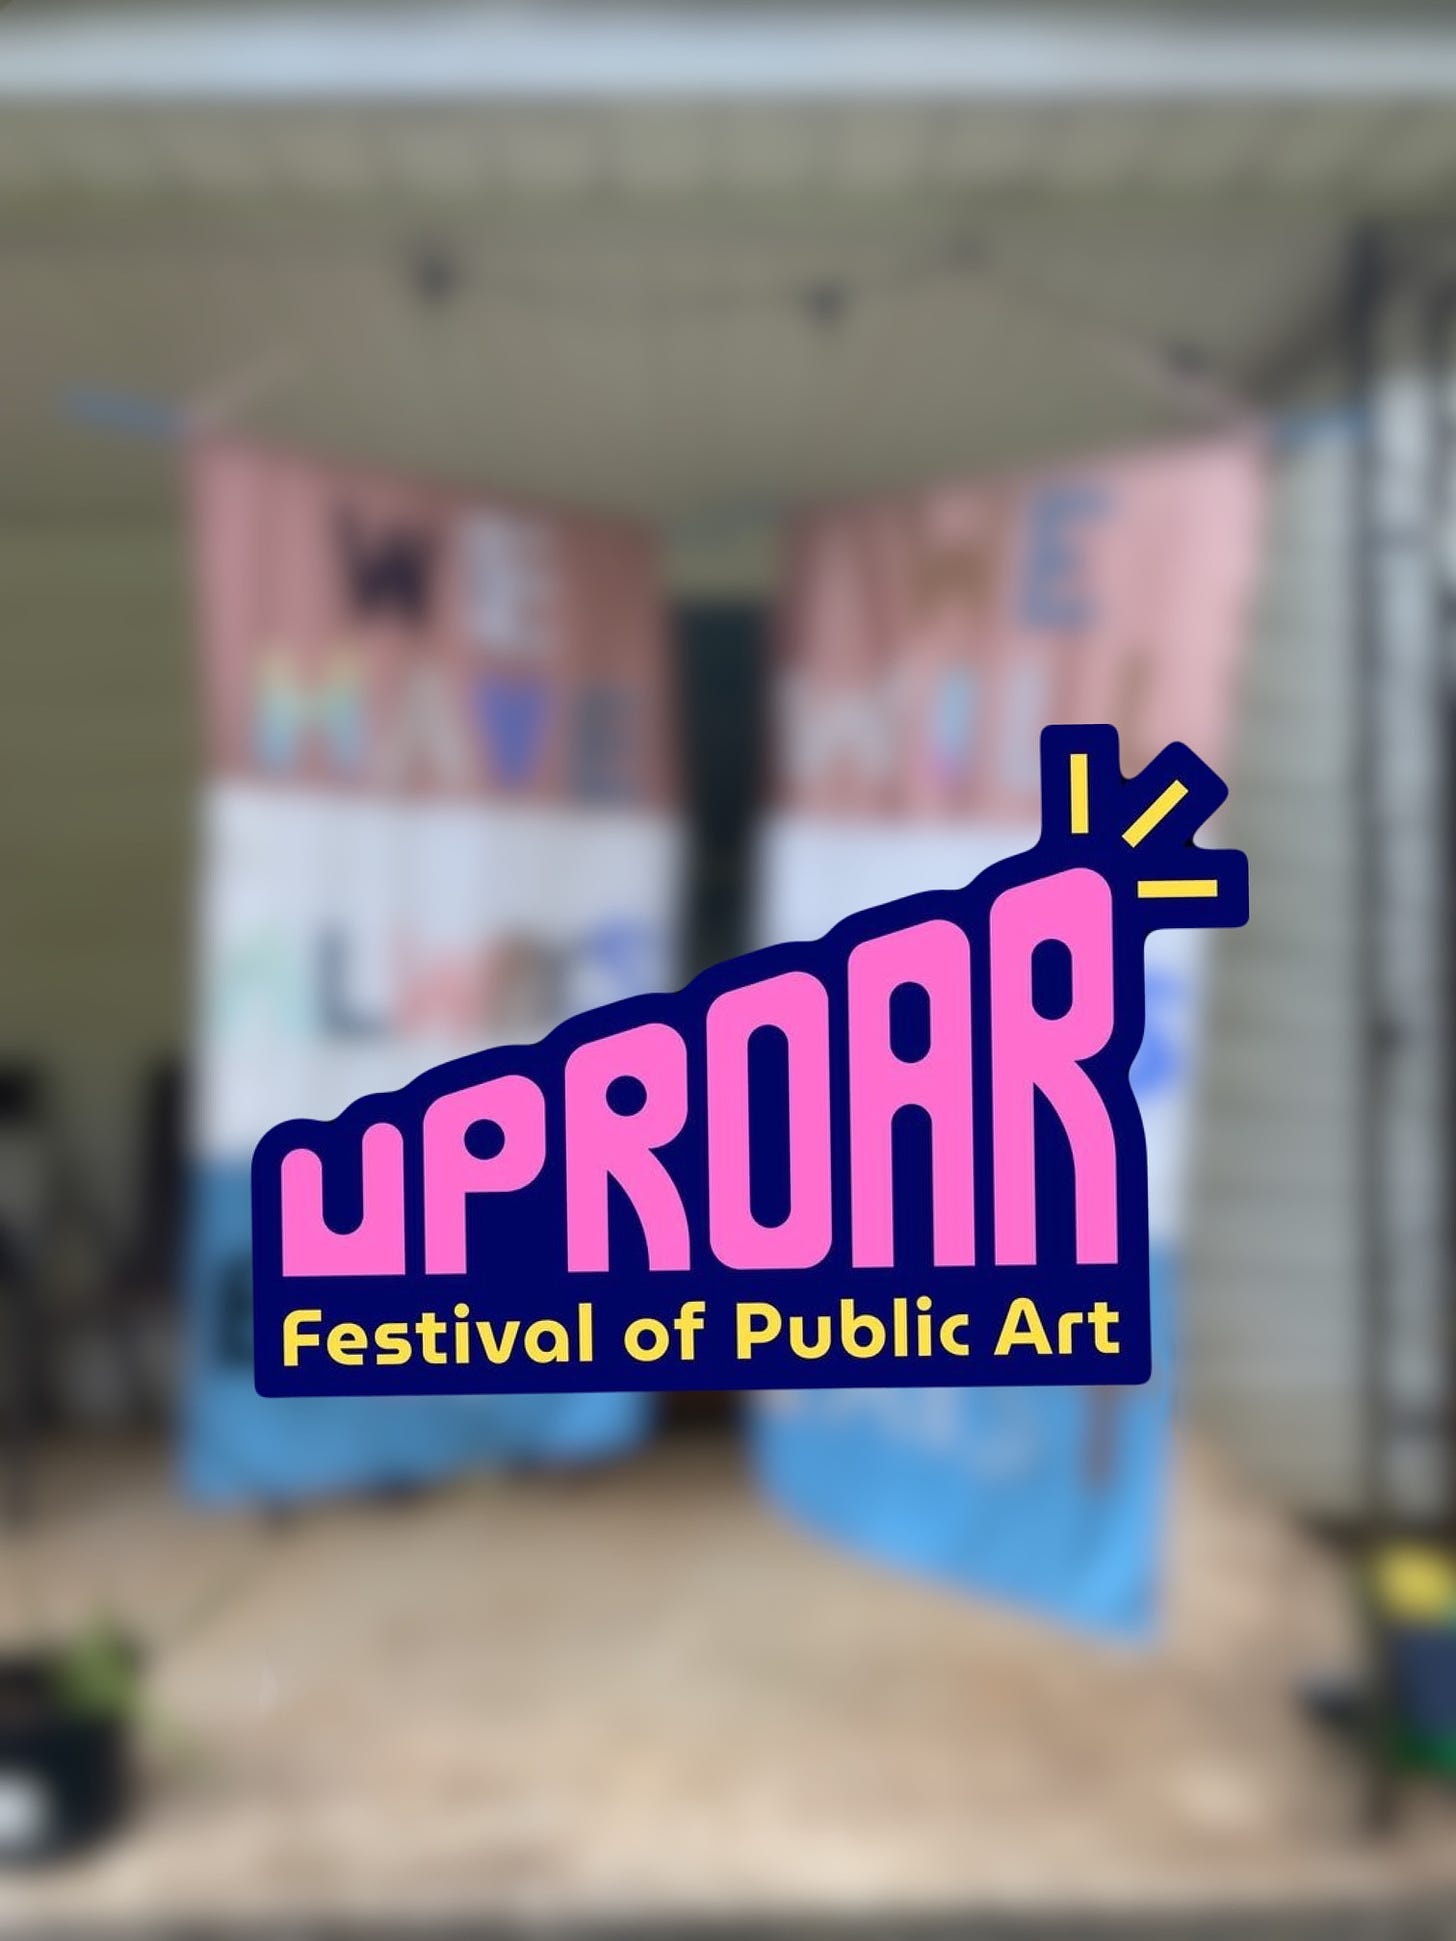 A blurred image of our artwork with the Uproar logo on top of it.